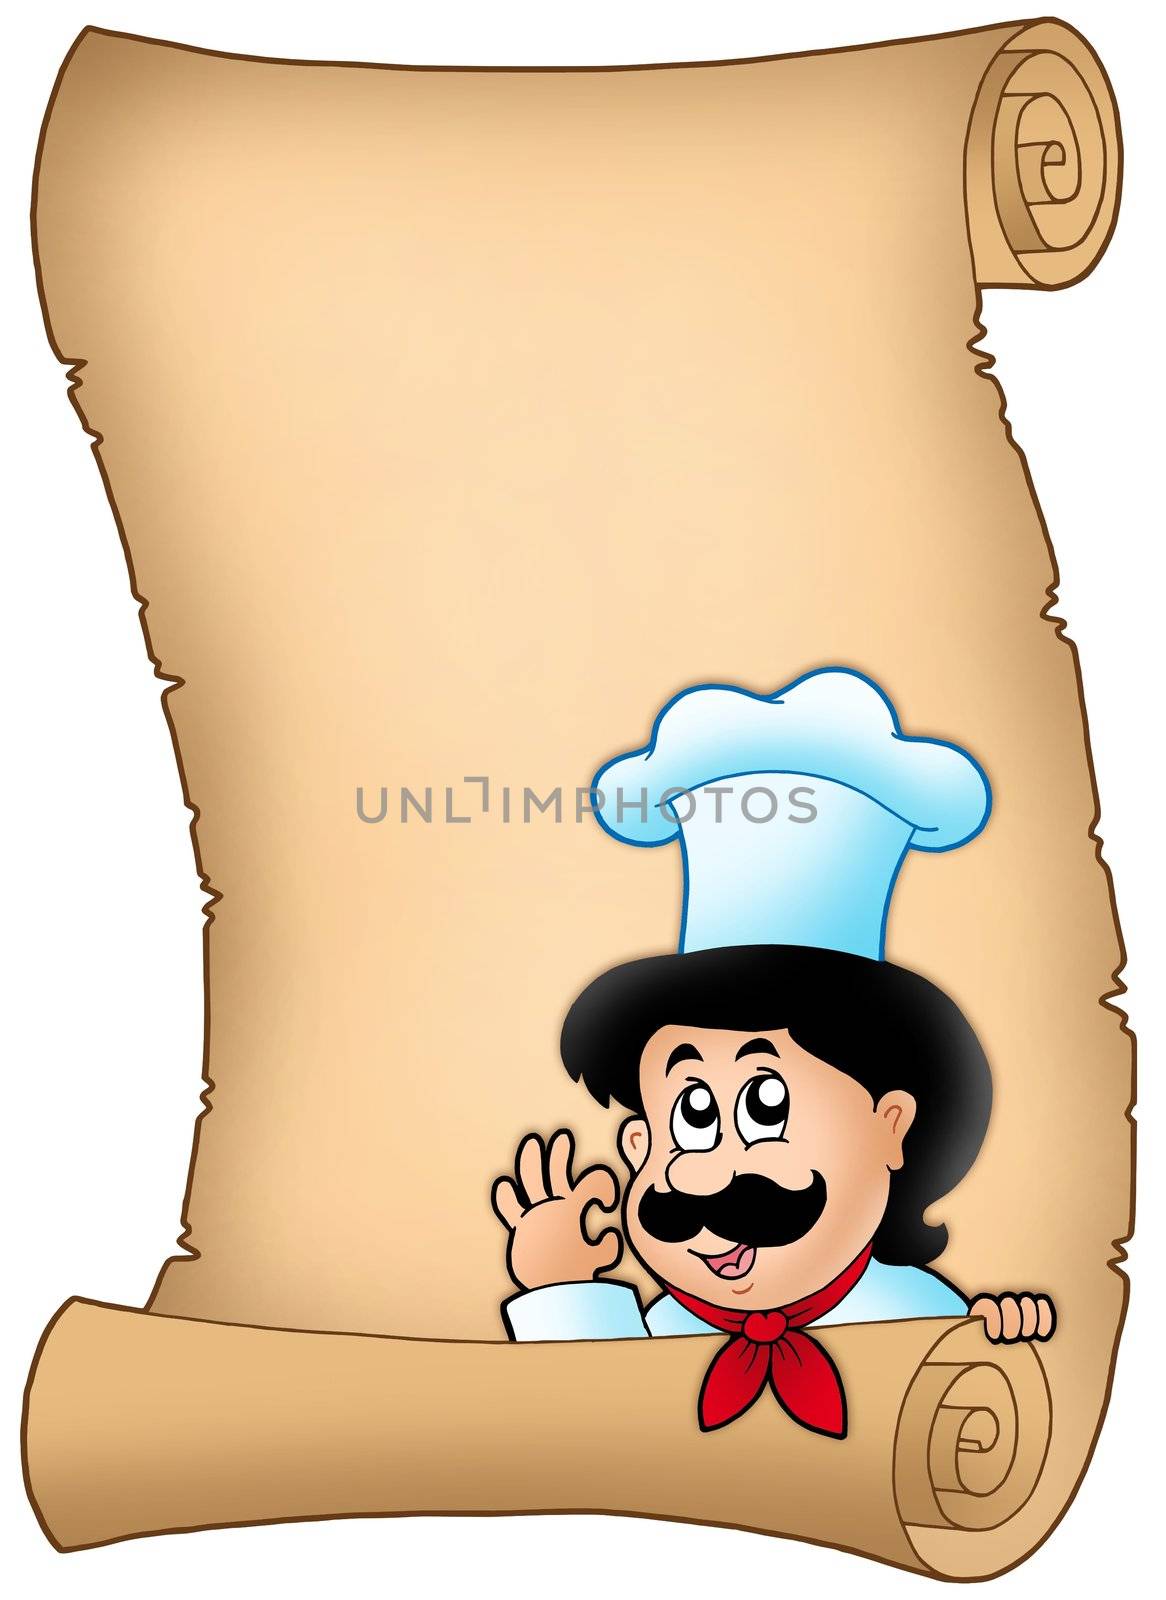 Parchment with lurking cartoon chef - color illustration.